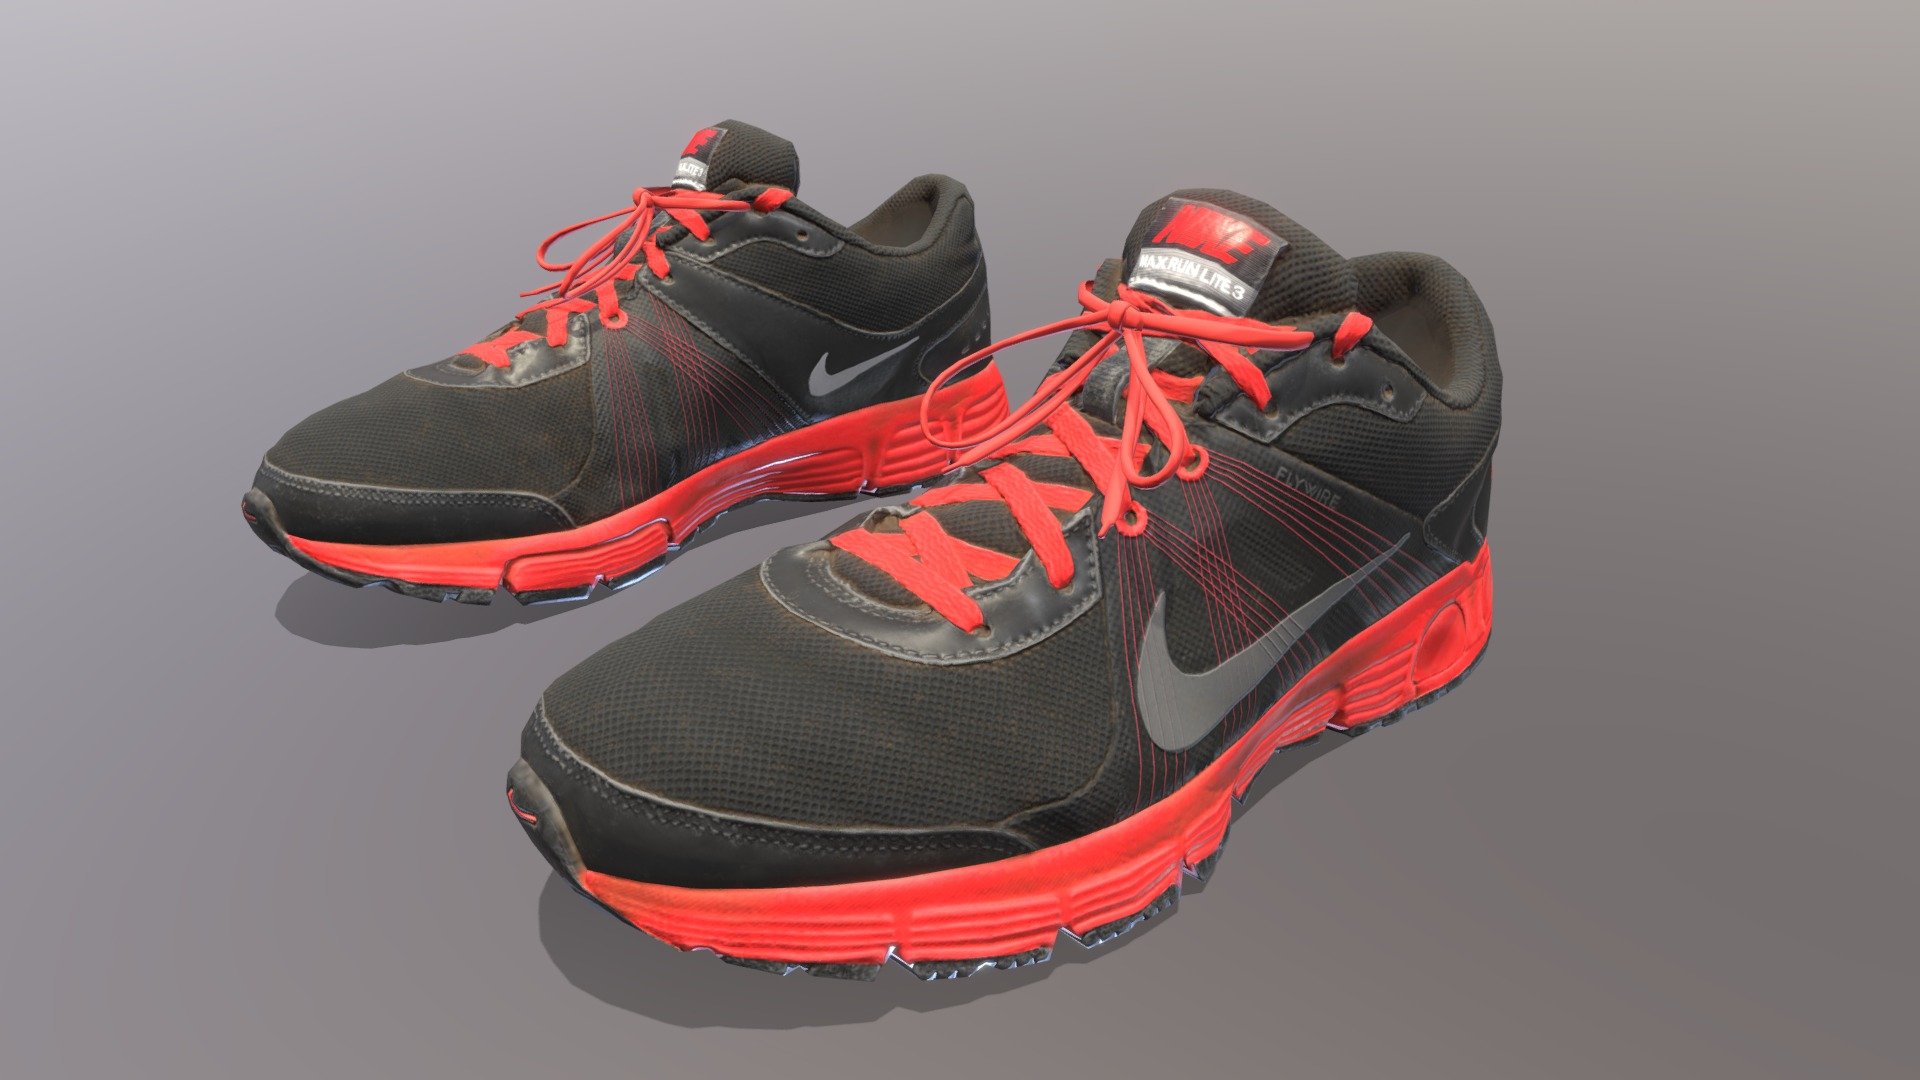 Retopology and texture practice using Substance Painter and blender 

3D Scan:
&lsquo;&lsquo;&ldquo;Nike Air Max Shoe 3D Scan (WithTexture)